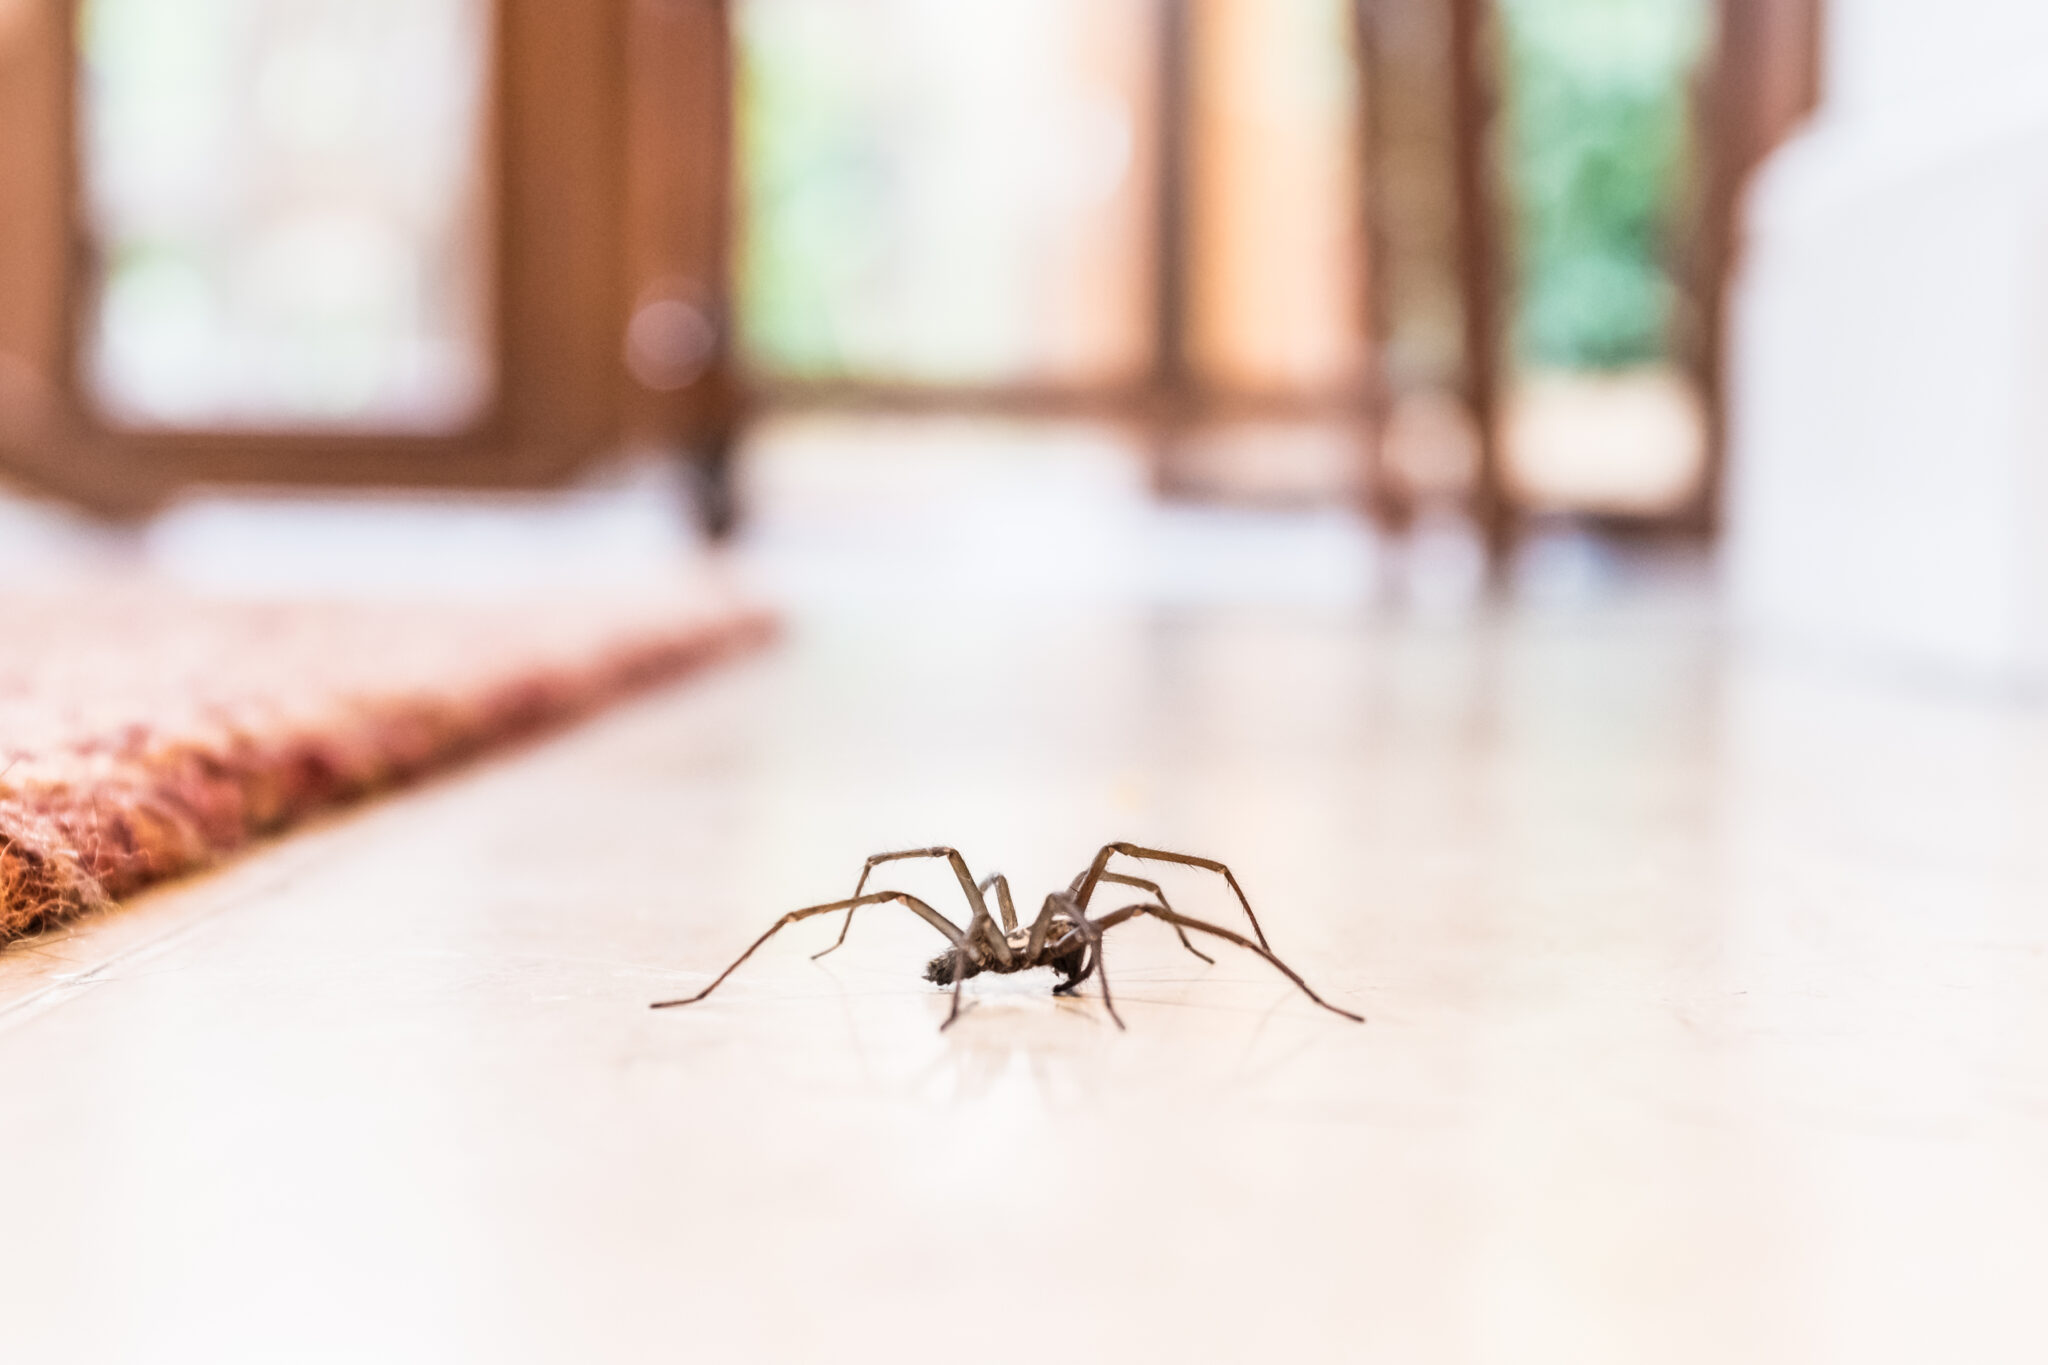 Spider crawling on the floor of a Gold Coast home